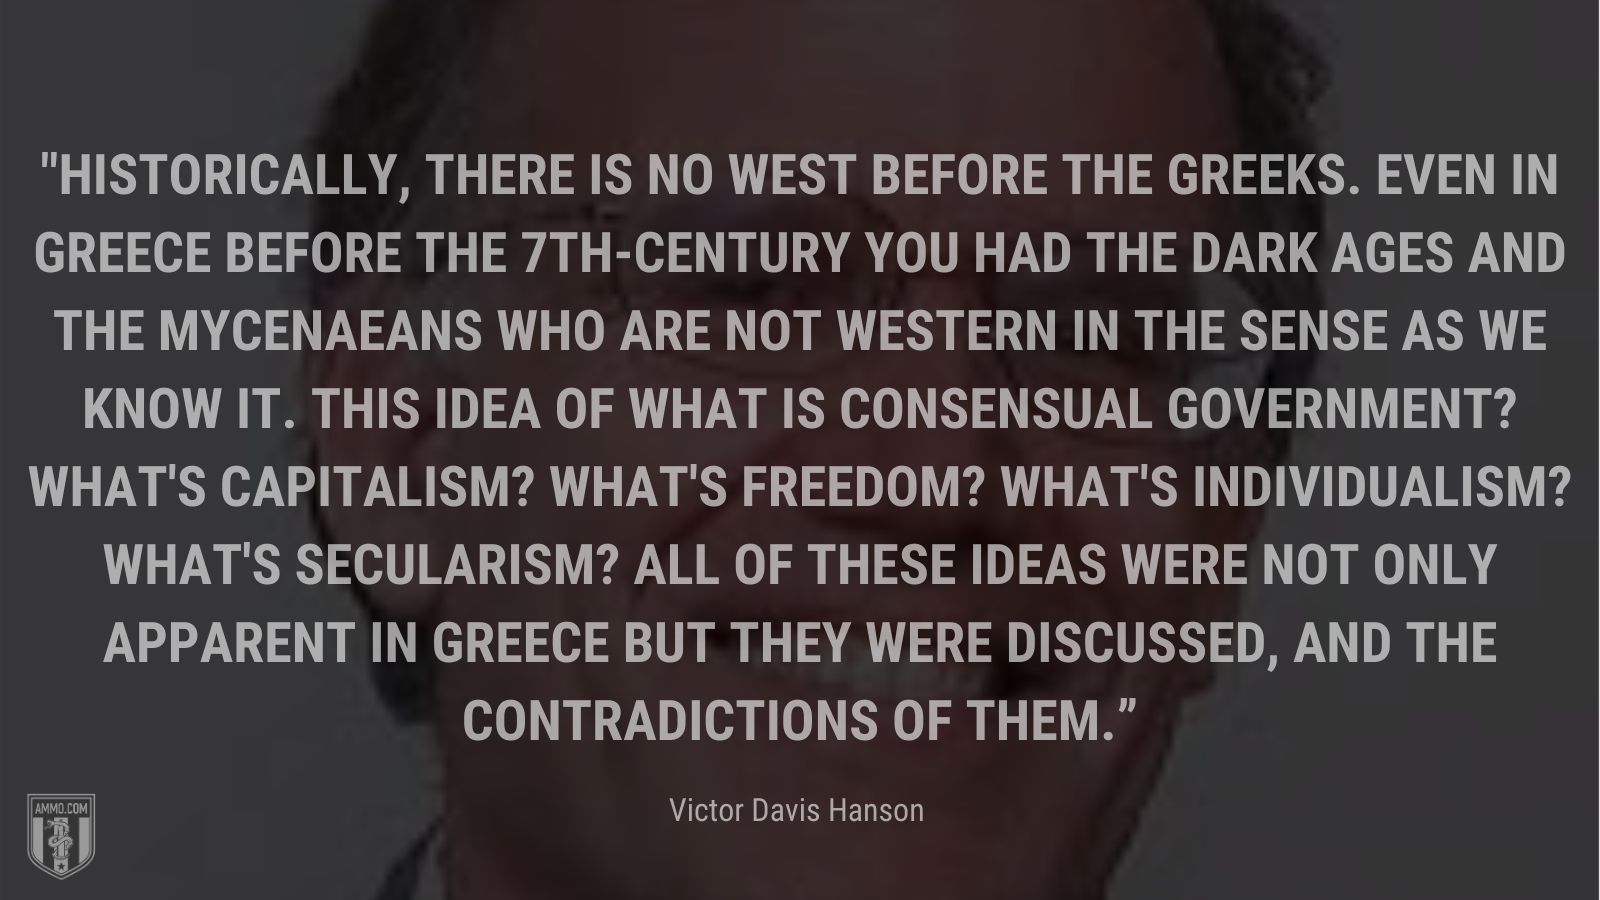 “Historically, there is no West before the Greeks. Even in Greece before the 7th-century you had the Dark Ages and the Mycenaeans who are not Western in the sense as we know it. This idea of what is consensual government? What's capitalism? What's freedom? What's individualism? What's secularism? All of these ideas were not only apparent in Greece but they were discussed, and the contradictions of them.” - Victor Davis Hanson